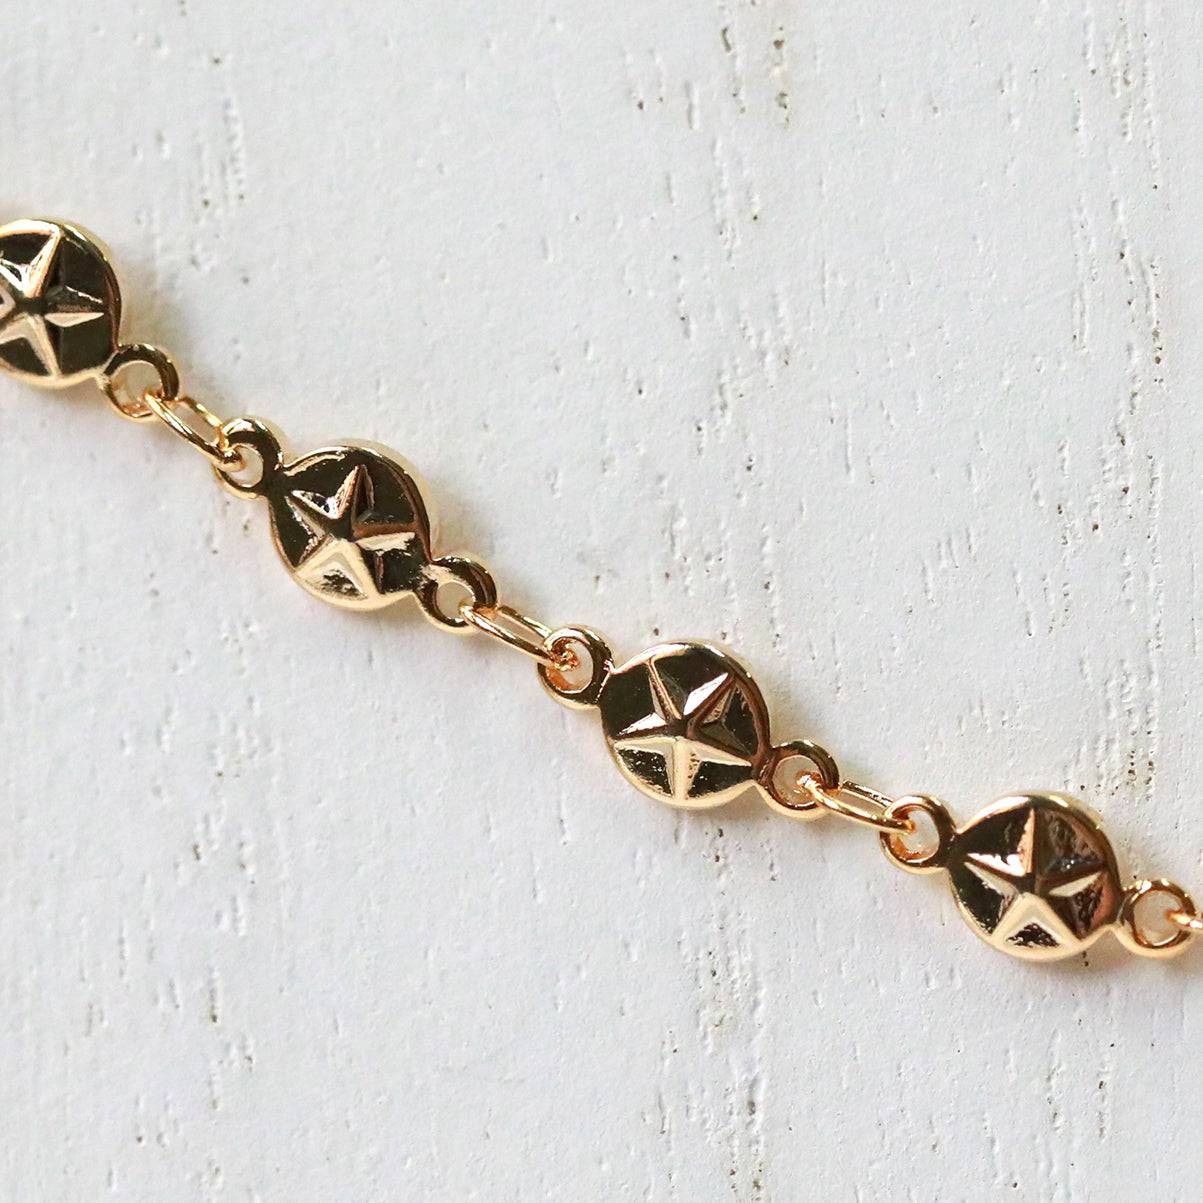 Charmed Bracelet - The Gilded Witch